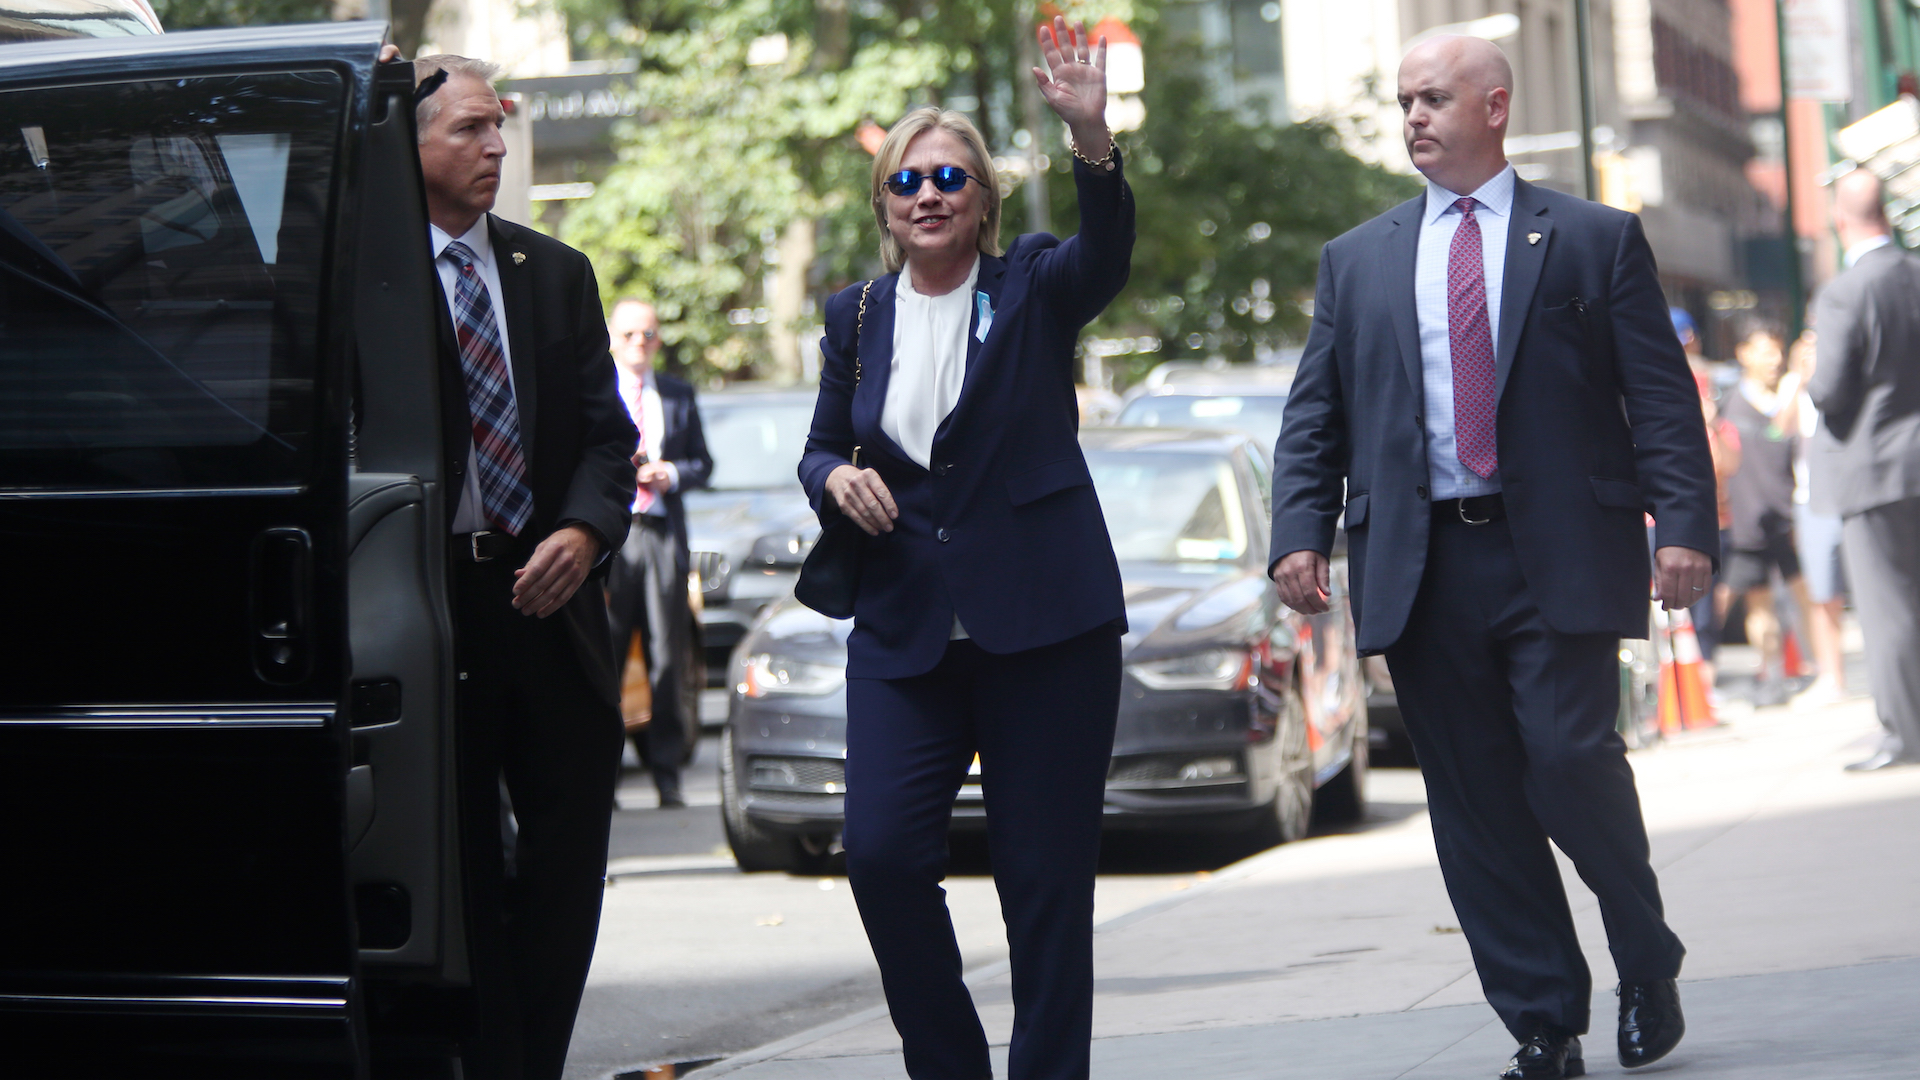 How September 11th Revealed the Real Hillary Clinton